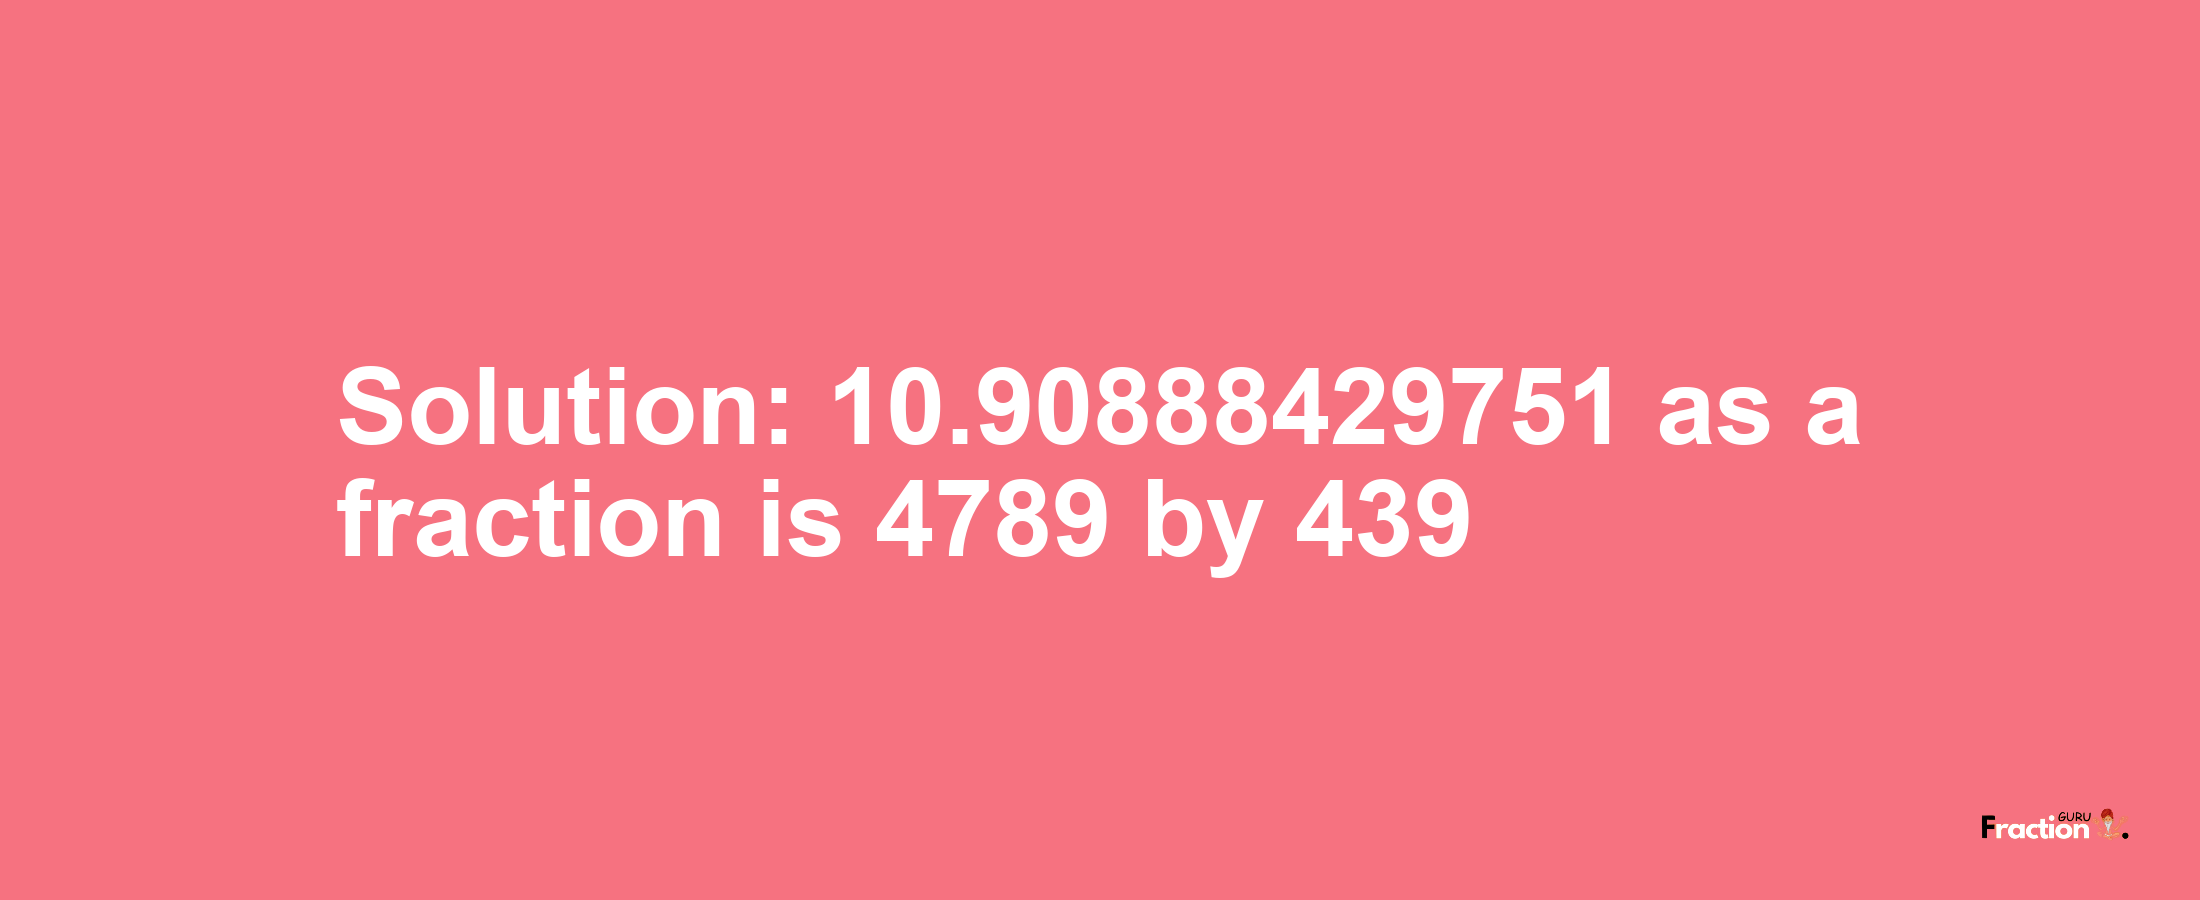 Solution:10.90888429751 as a fraction is 4789/439